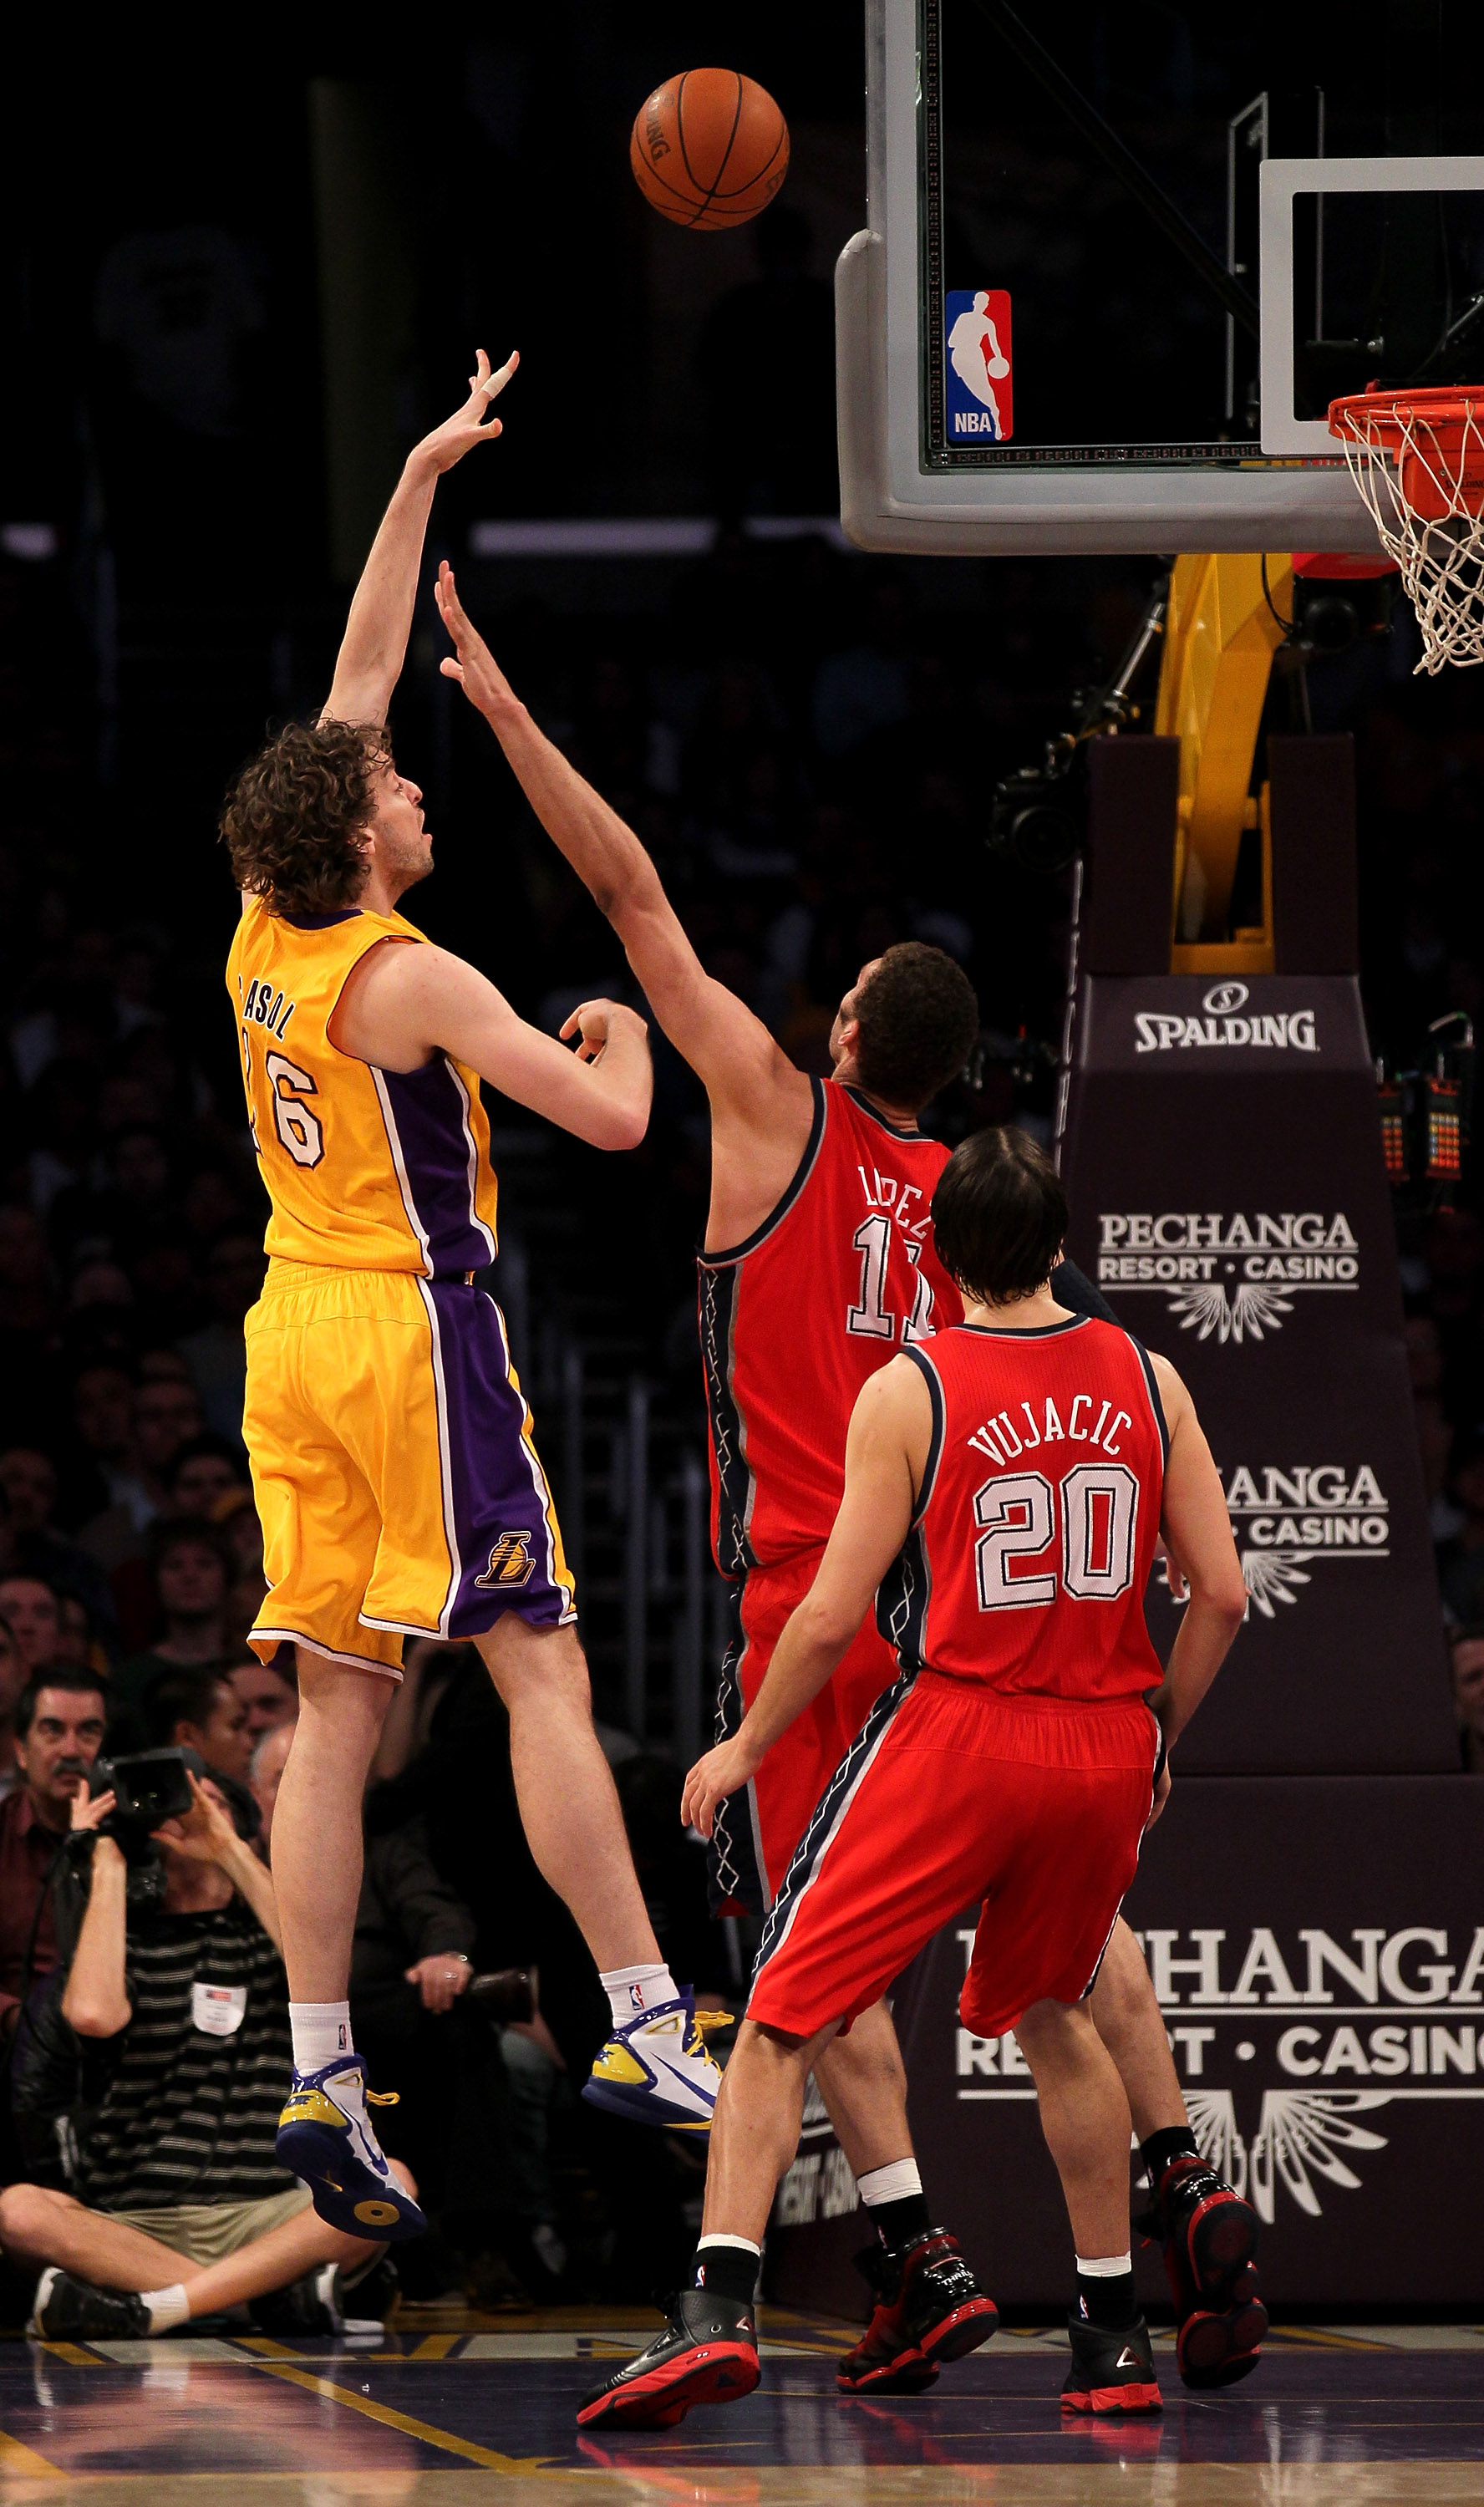 LOS ANGELES, CA - JANUARY 14:  Pau Gasol #16 of the Los Angeles Lakers shoots over Brook Lopez #11 and Sasha Vujacic #20 of the New Jersey Nets at Staples Center on January 14, 2011 in Los Angeles, California. The Lakers won 100-88.  NOTE TO USER: User ex